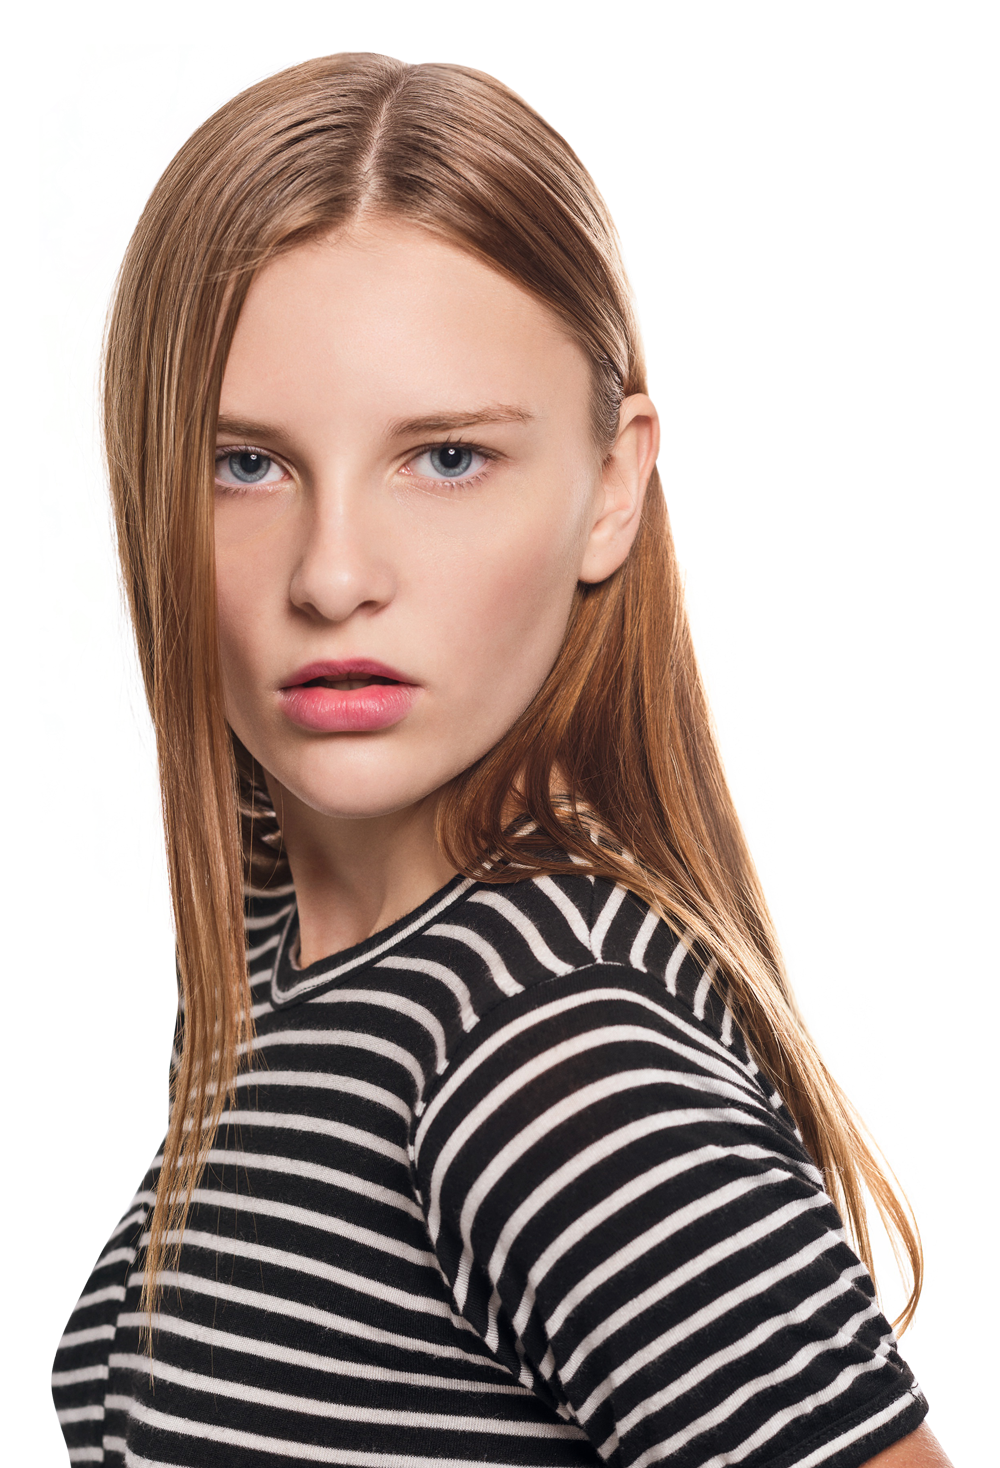 A Woman With Long Hair Wearing A Striped Shirt